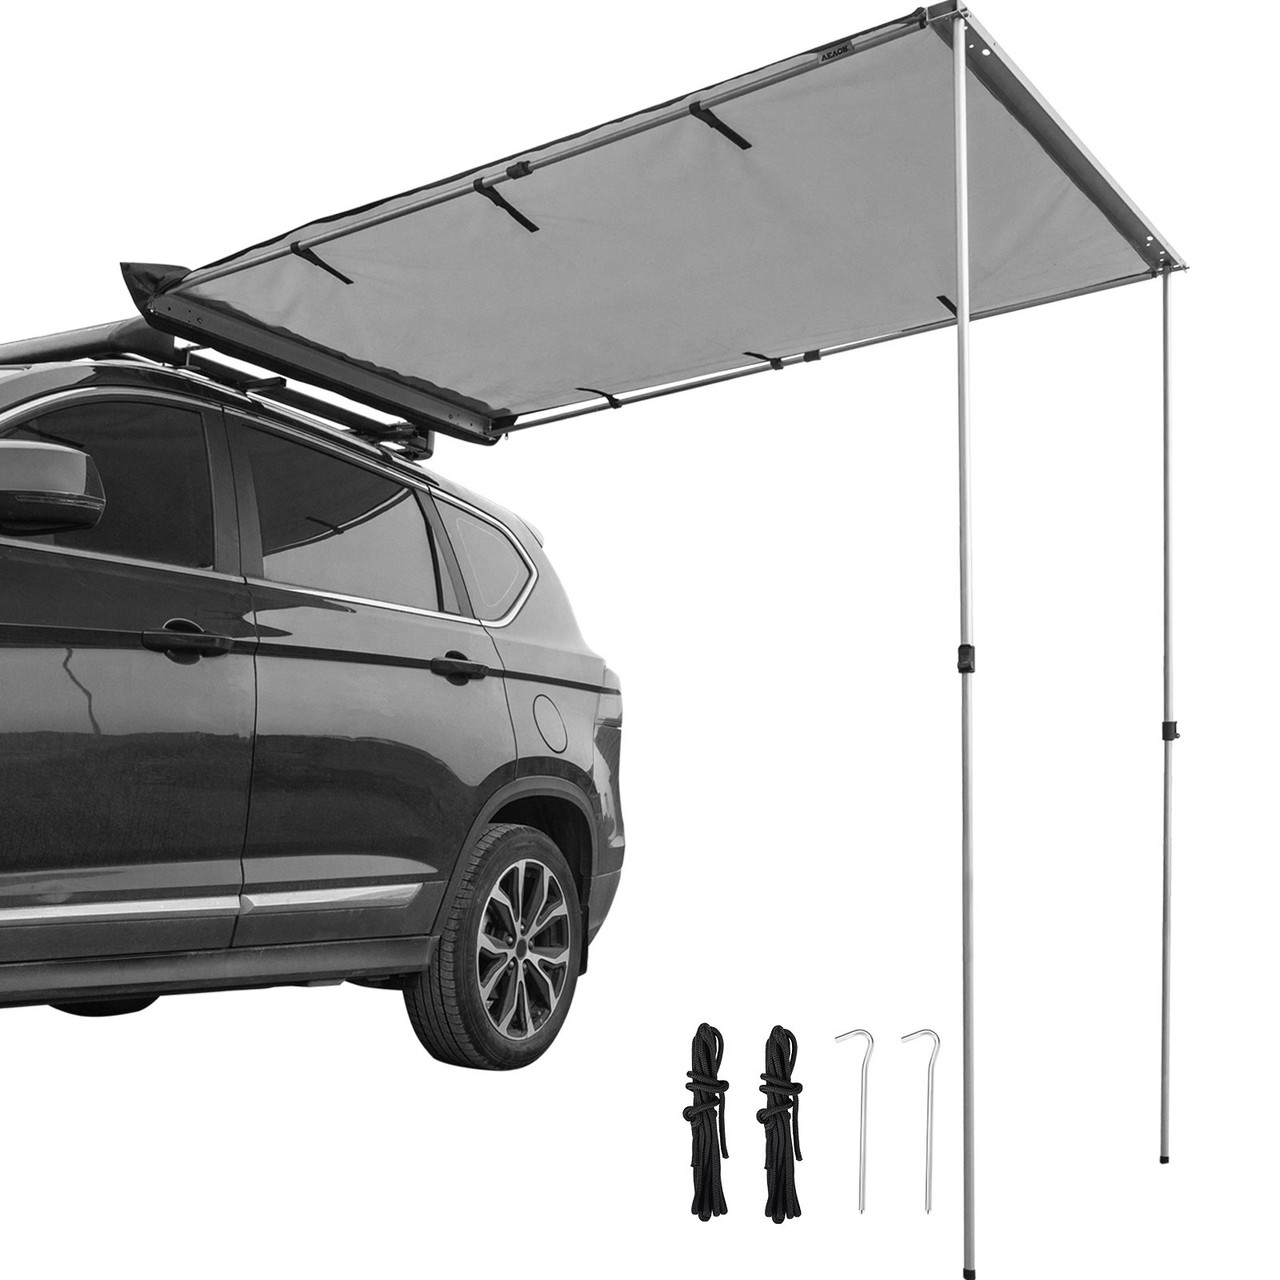 Car Side Awning, 6.6'x8.2', Pull-Out Retractable Vehicle Awning Waterproof UV50+, Telescoping Poles Trailer Sunshade Rooftop Tent w/ Carry Bag for Jeep/SUV/Truck/Van Outdoor Camping Travel, Grey